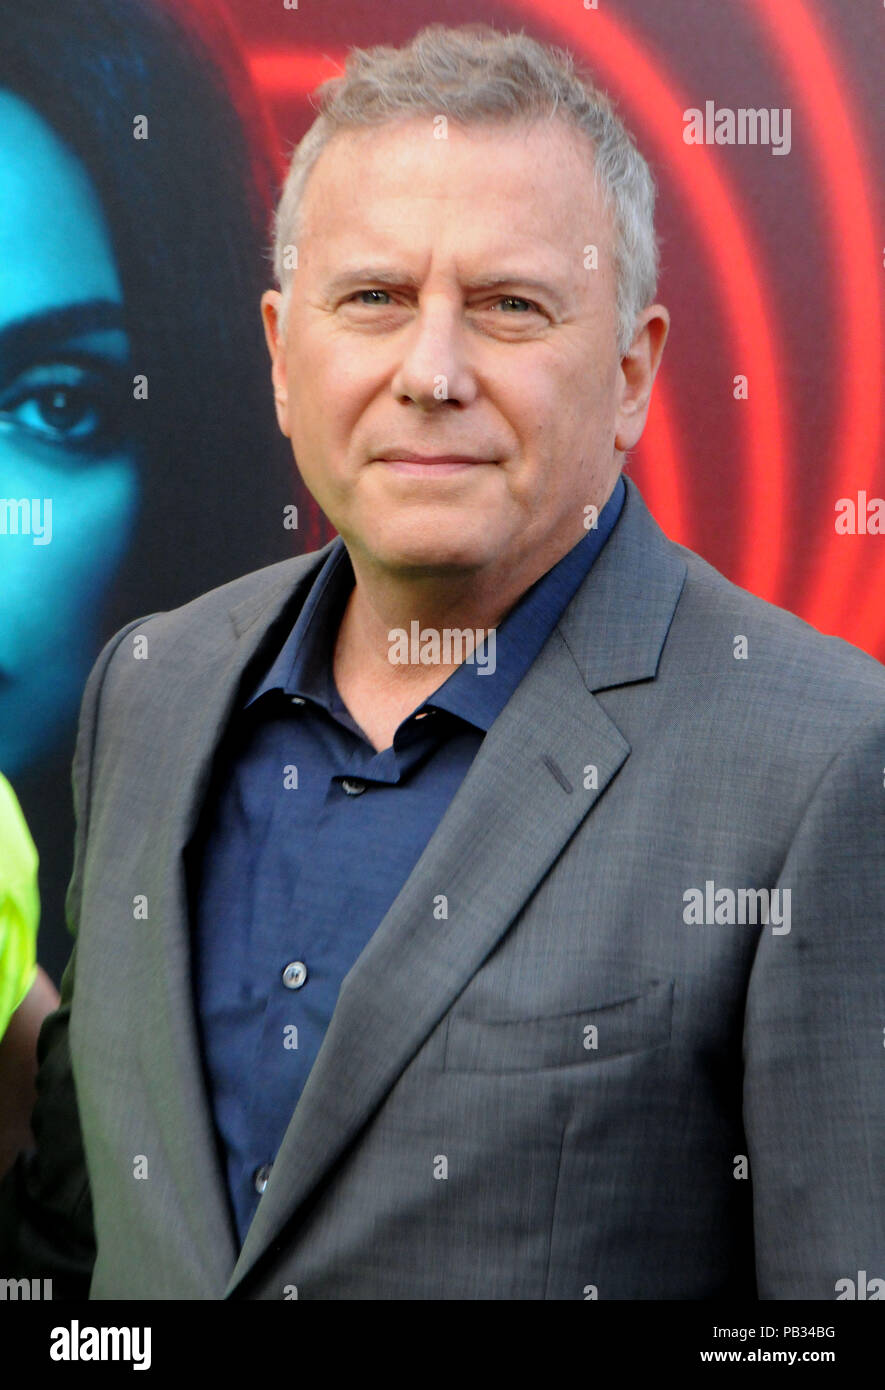 Los Angeles, California, USA. 25th July, 2018. Actor Paul Reiser attends the World Premiere of Lionsgate's' 'The Spy Who Dumped Me' on July 25, 2018 at Fox Village Theatre in Los Angeles, California. Photo by Barry King/Alamy Live News Stock Photo